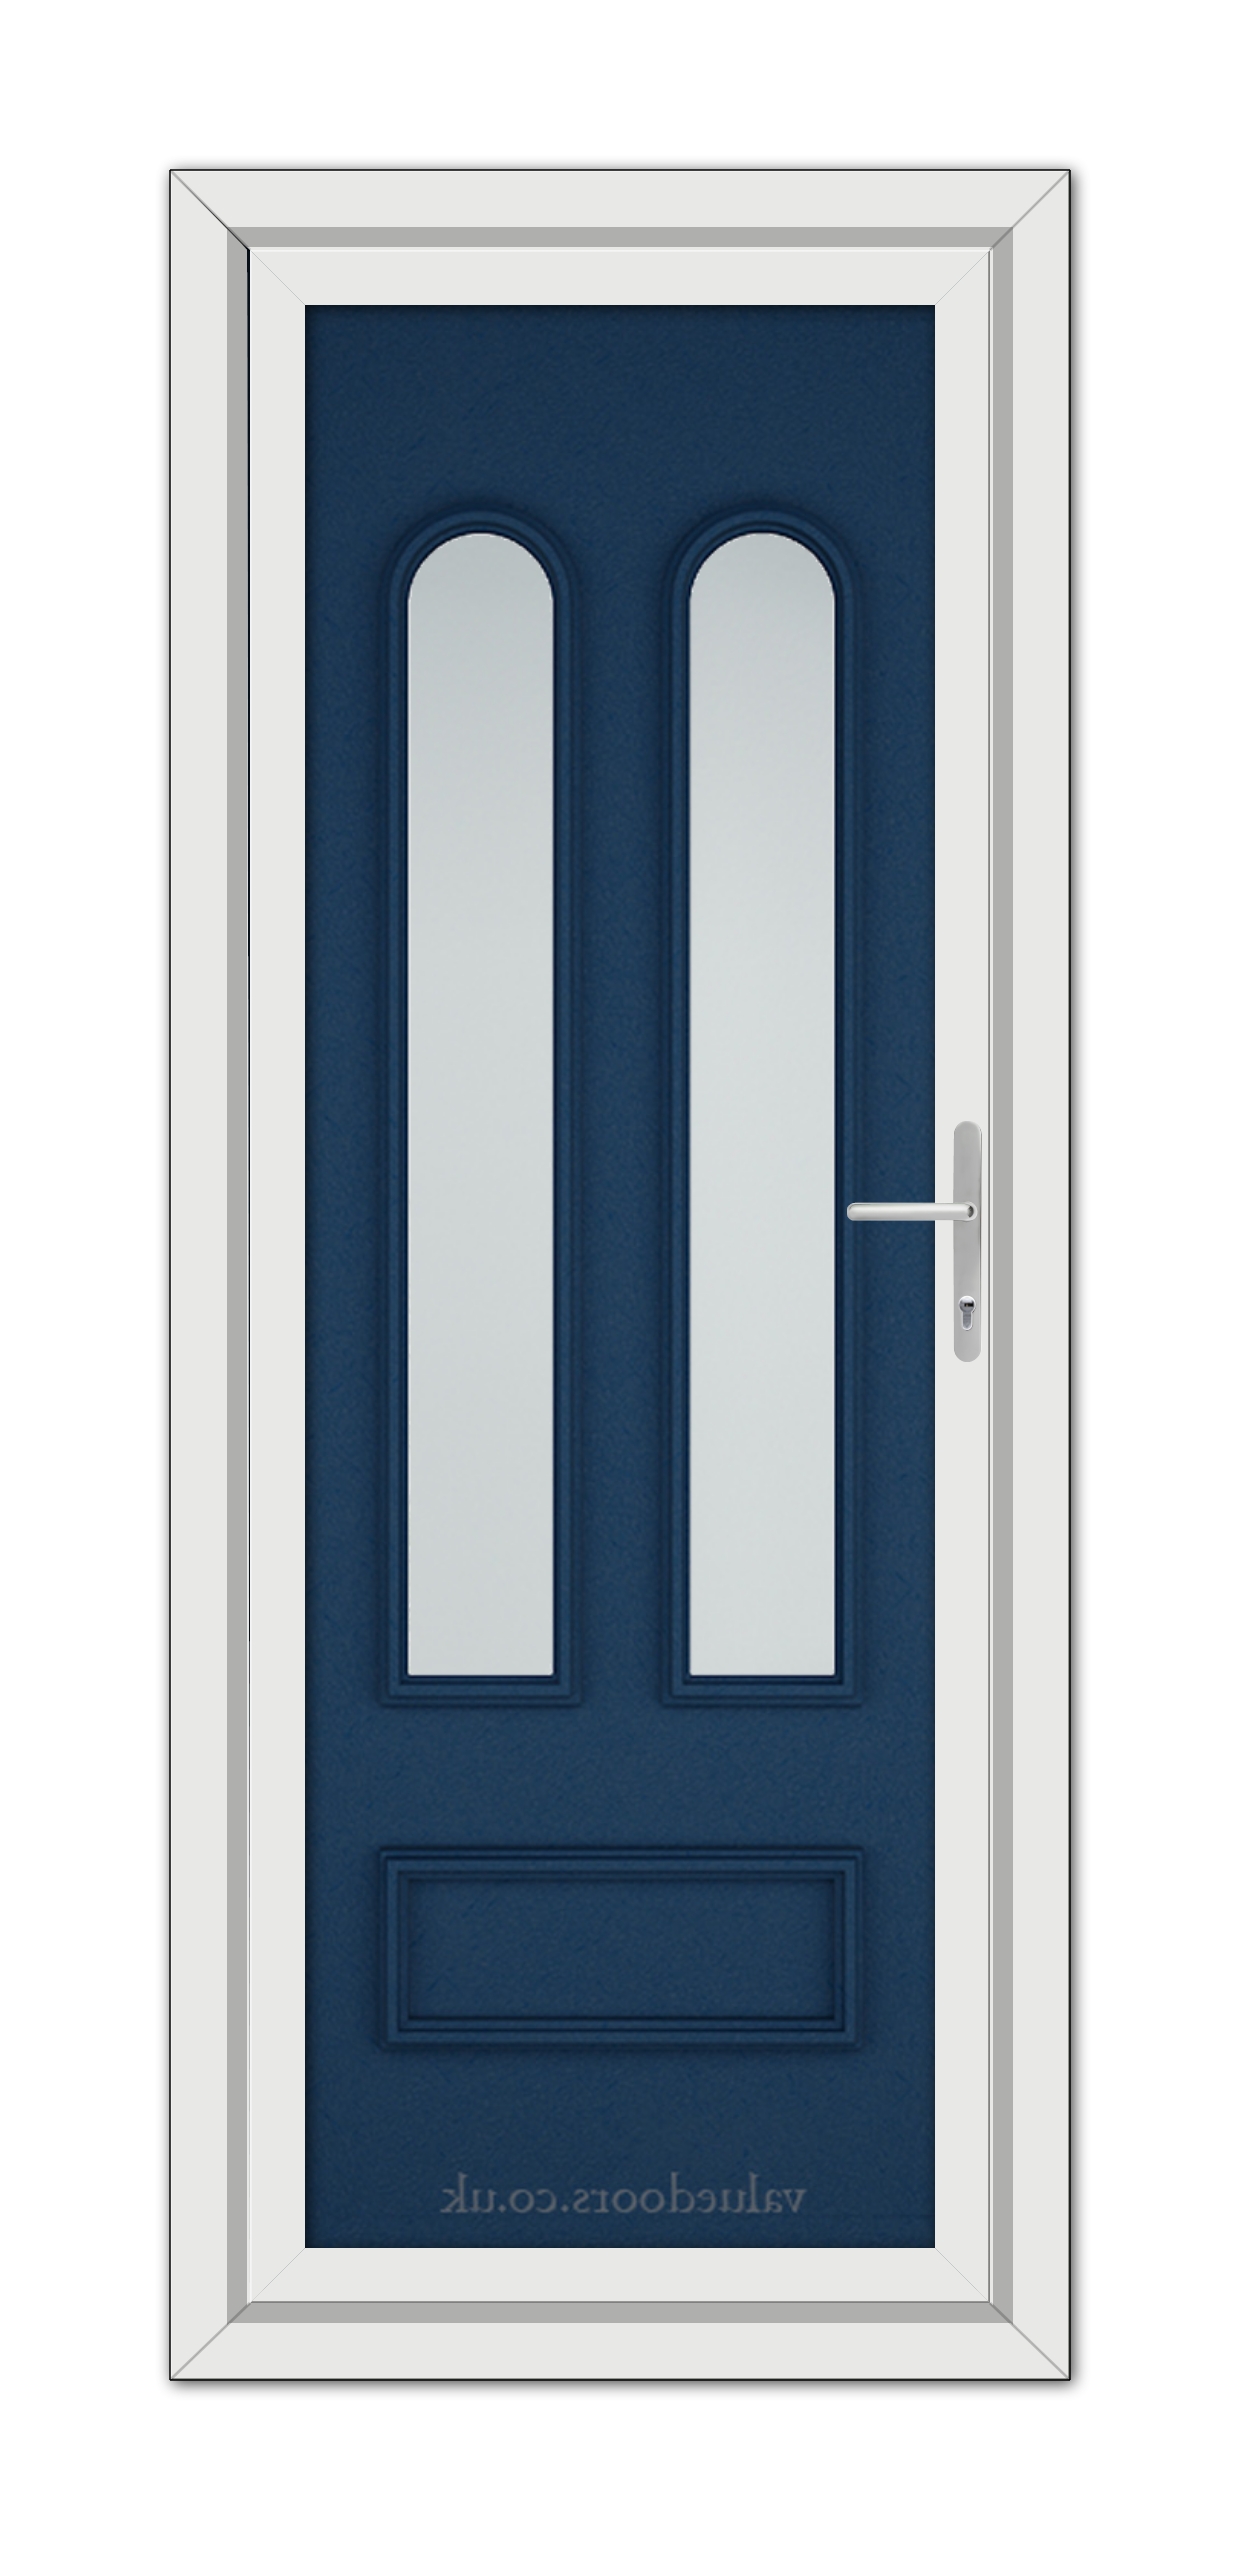 A vertical image of a modern Blue Madrid uPVC Door with long white glass panels and a silver handle, set within a white frame.